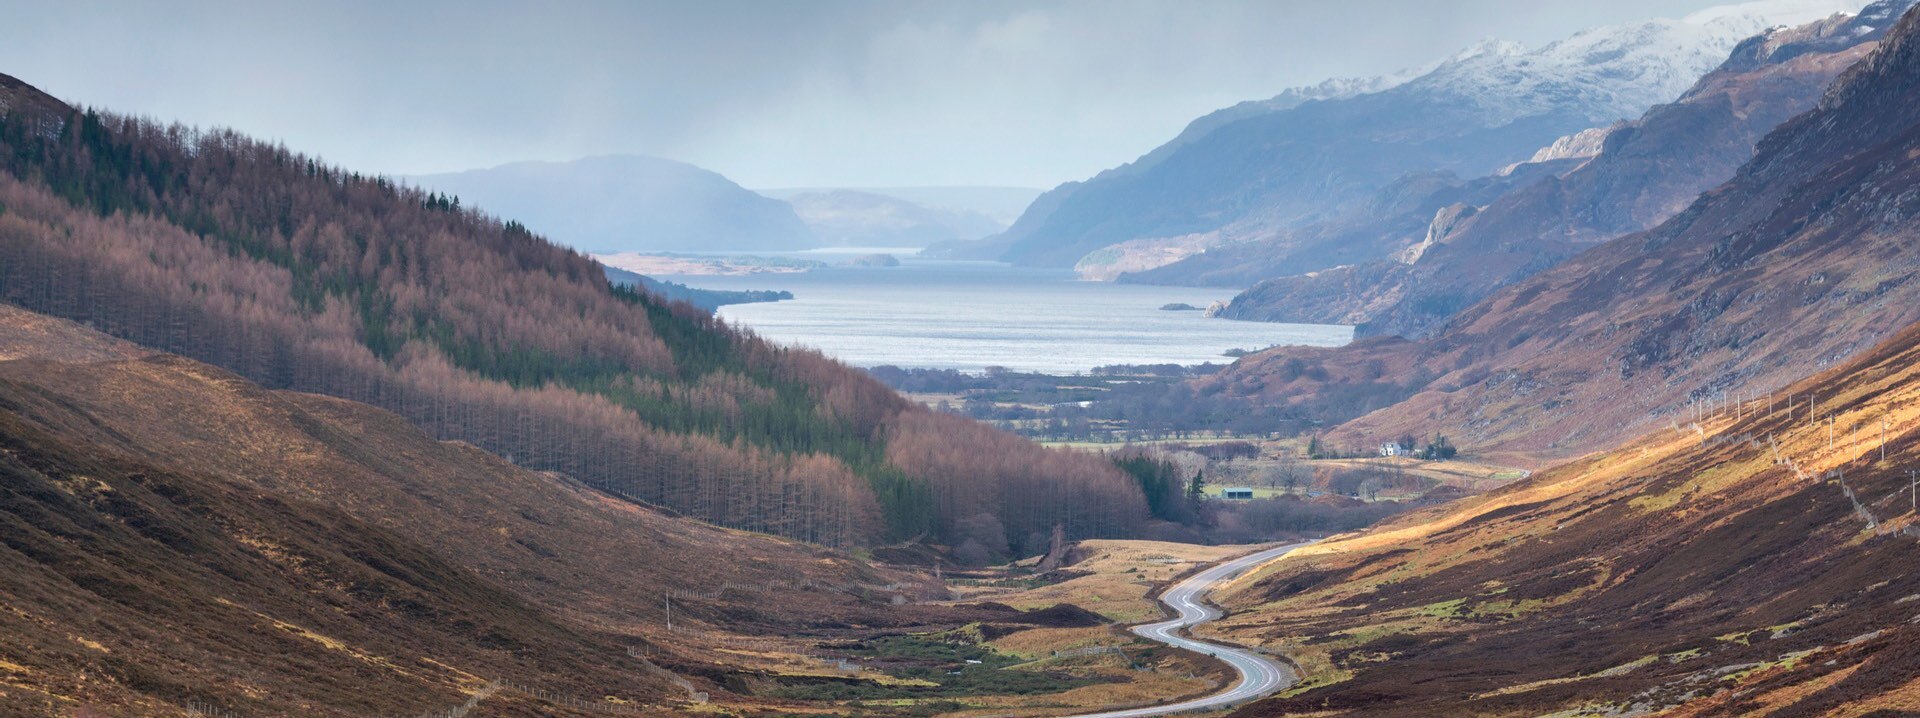 The road cuts through the hills and mountains to the loch in the distance